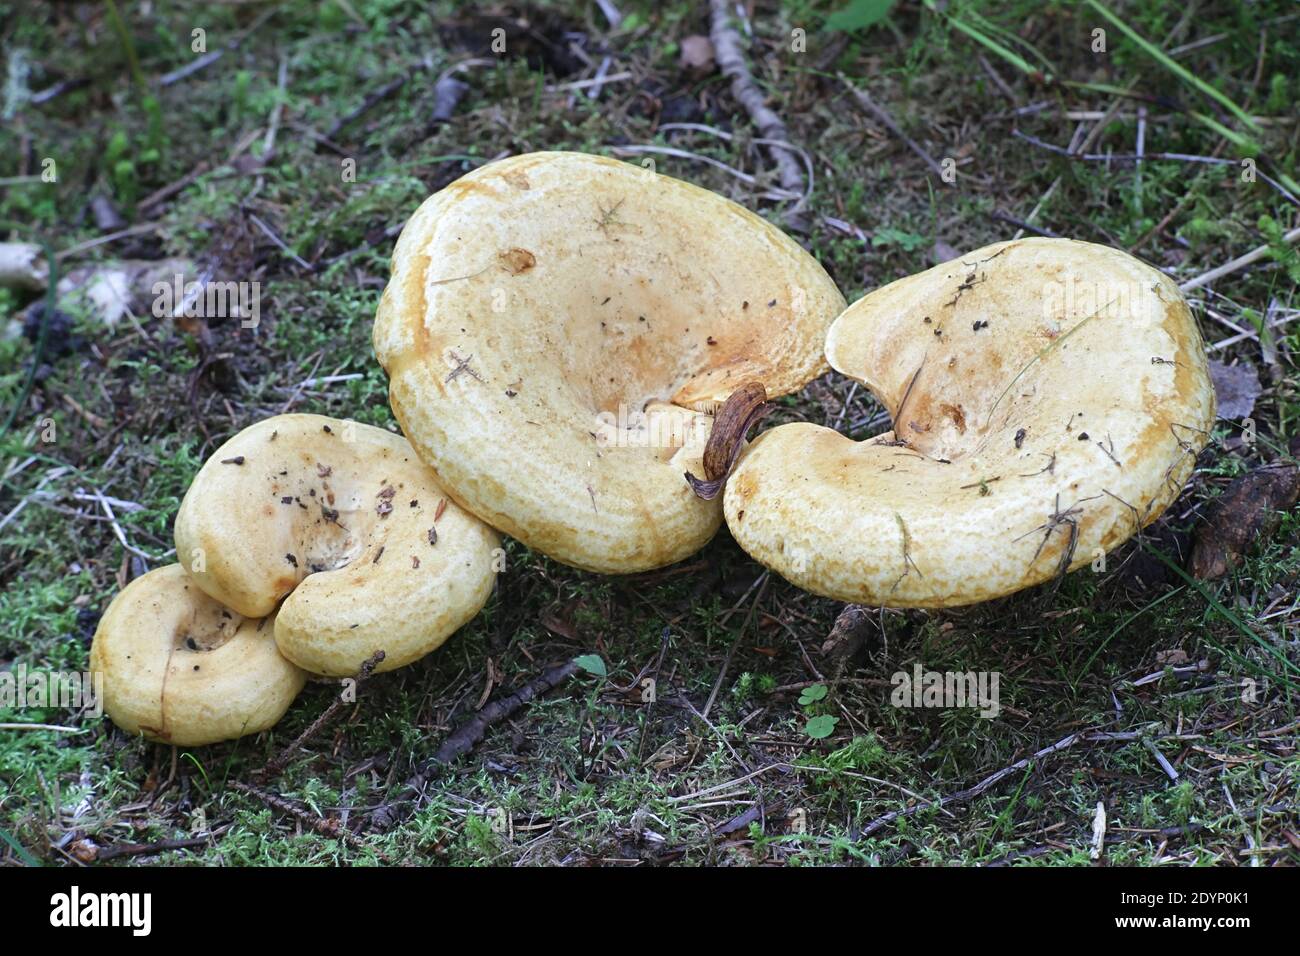 Lactarius scrobiculatus, also known as Lactifluus scrobiculatus, commonly called the spotted milkcap, wild mushroom from Finland Stock Photo